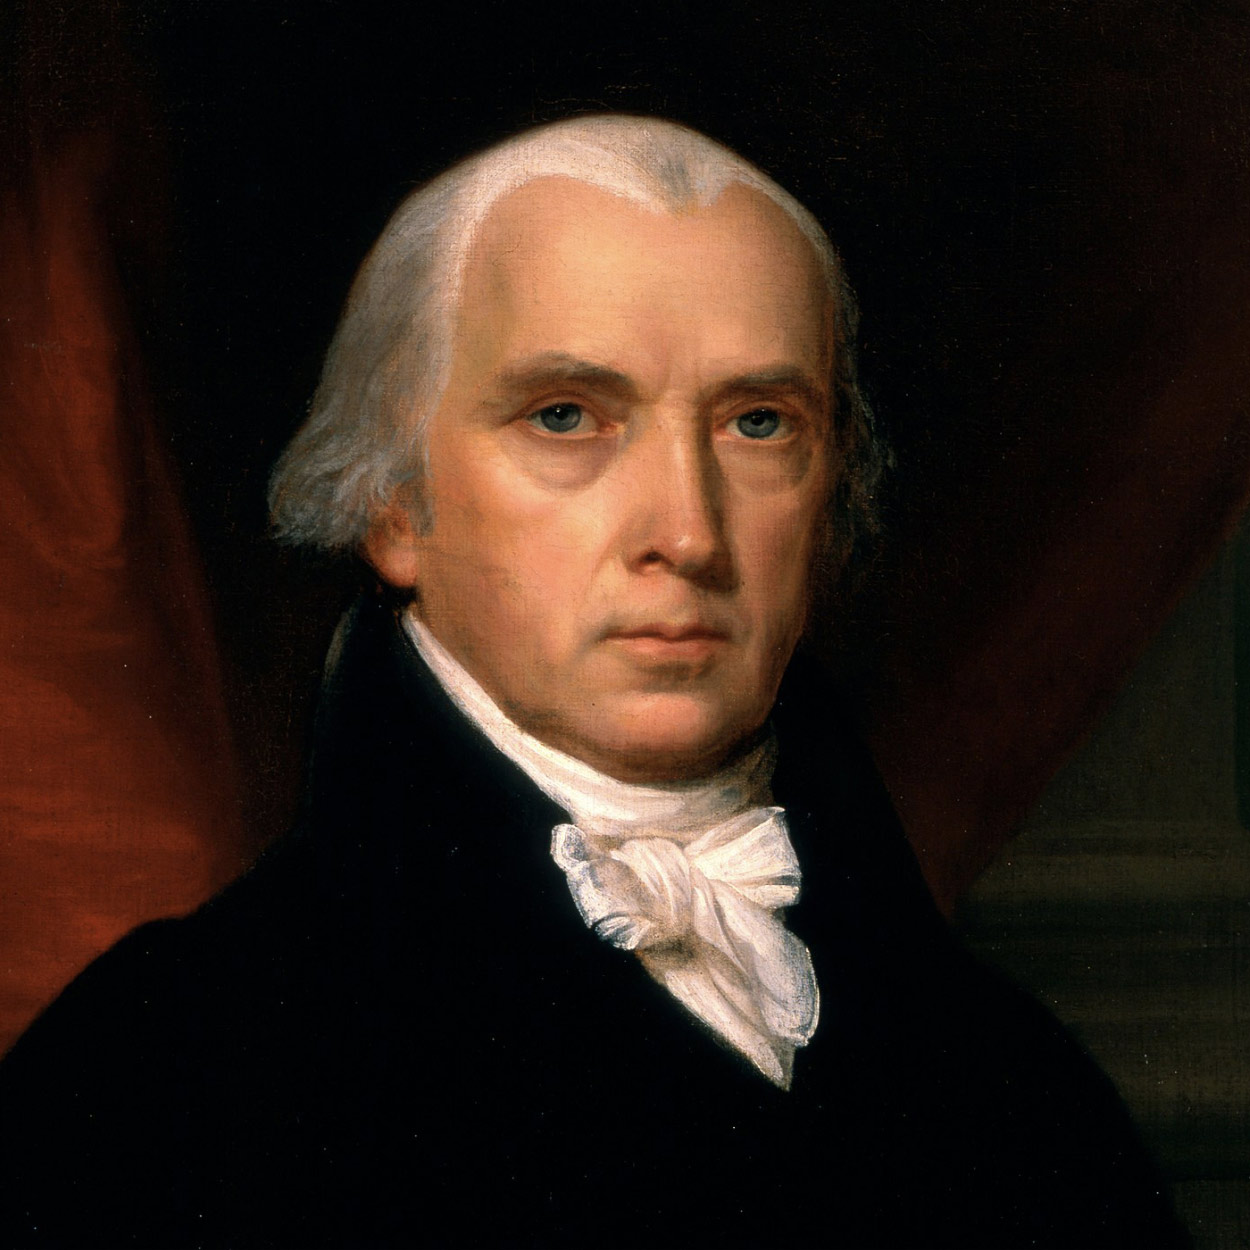 Portrait of James Madison, the 4th President of the United States